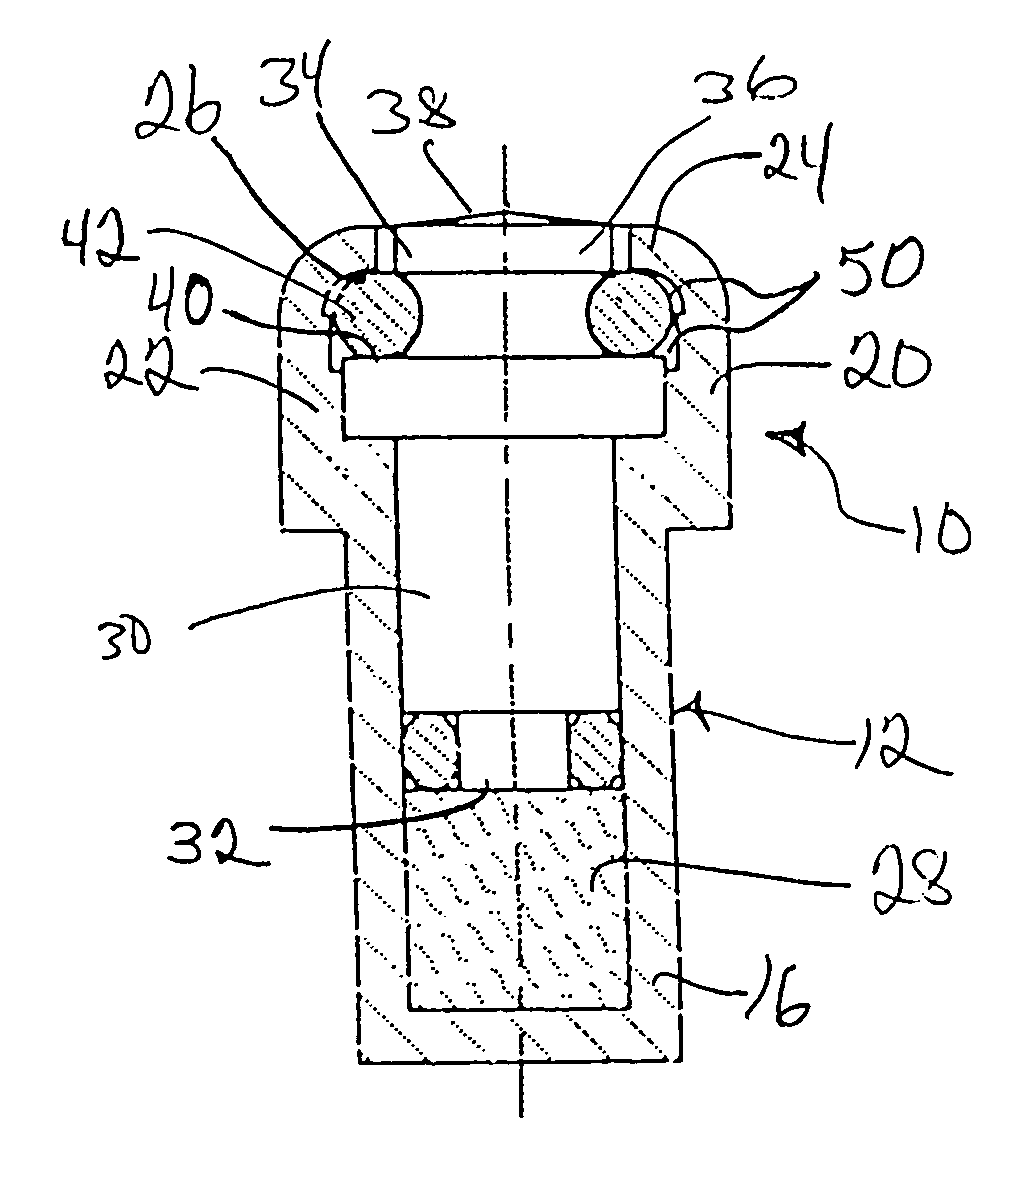 Self-contained thermal actuator